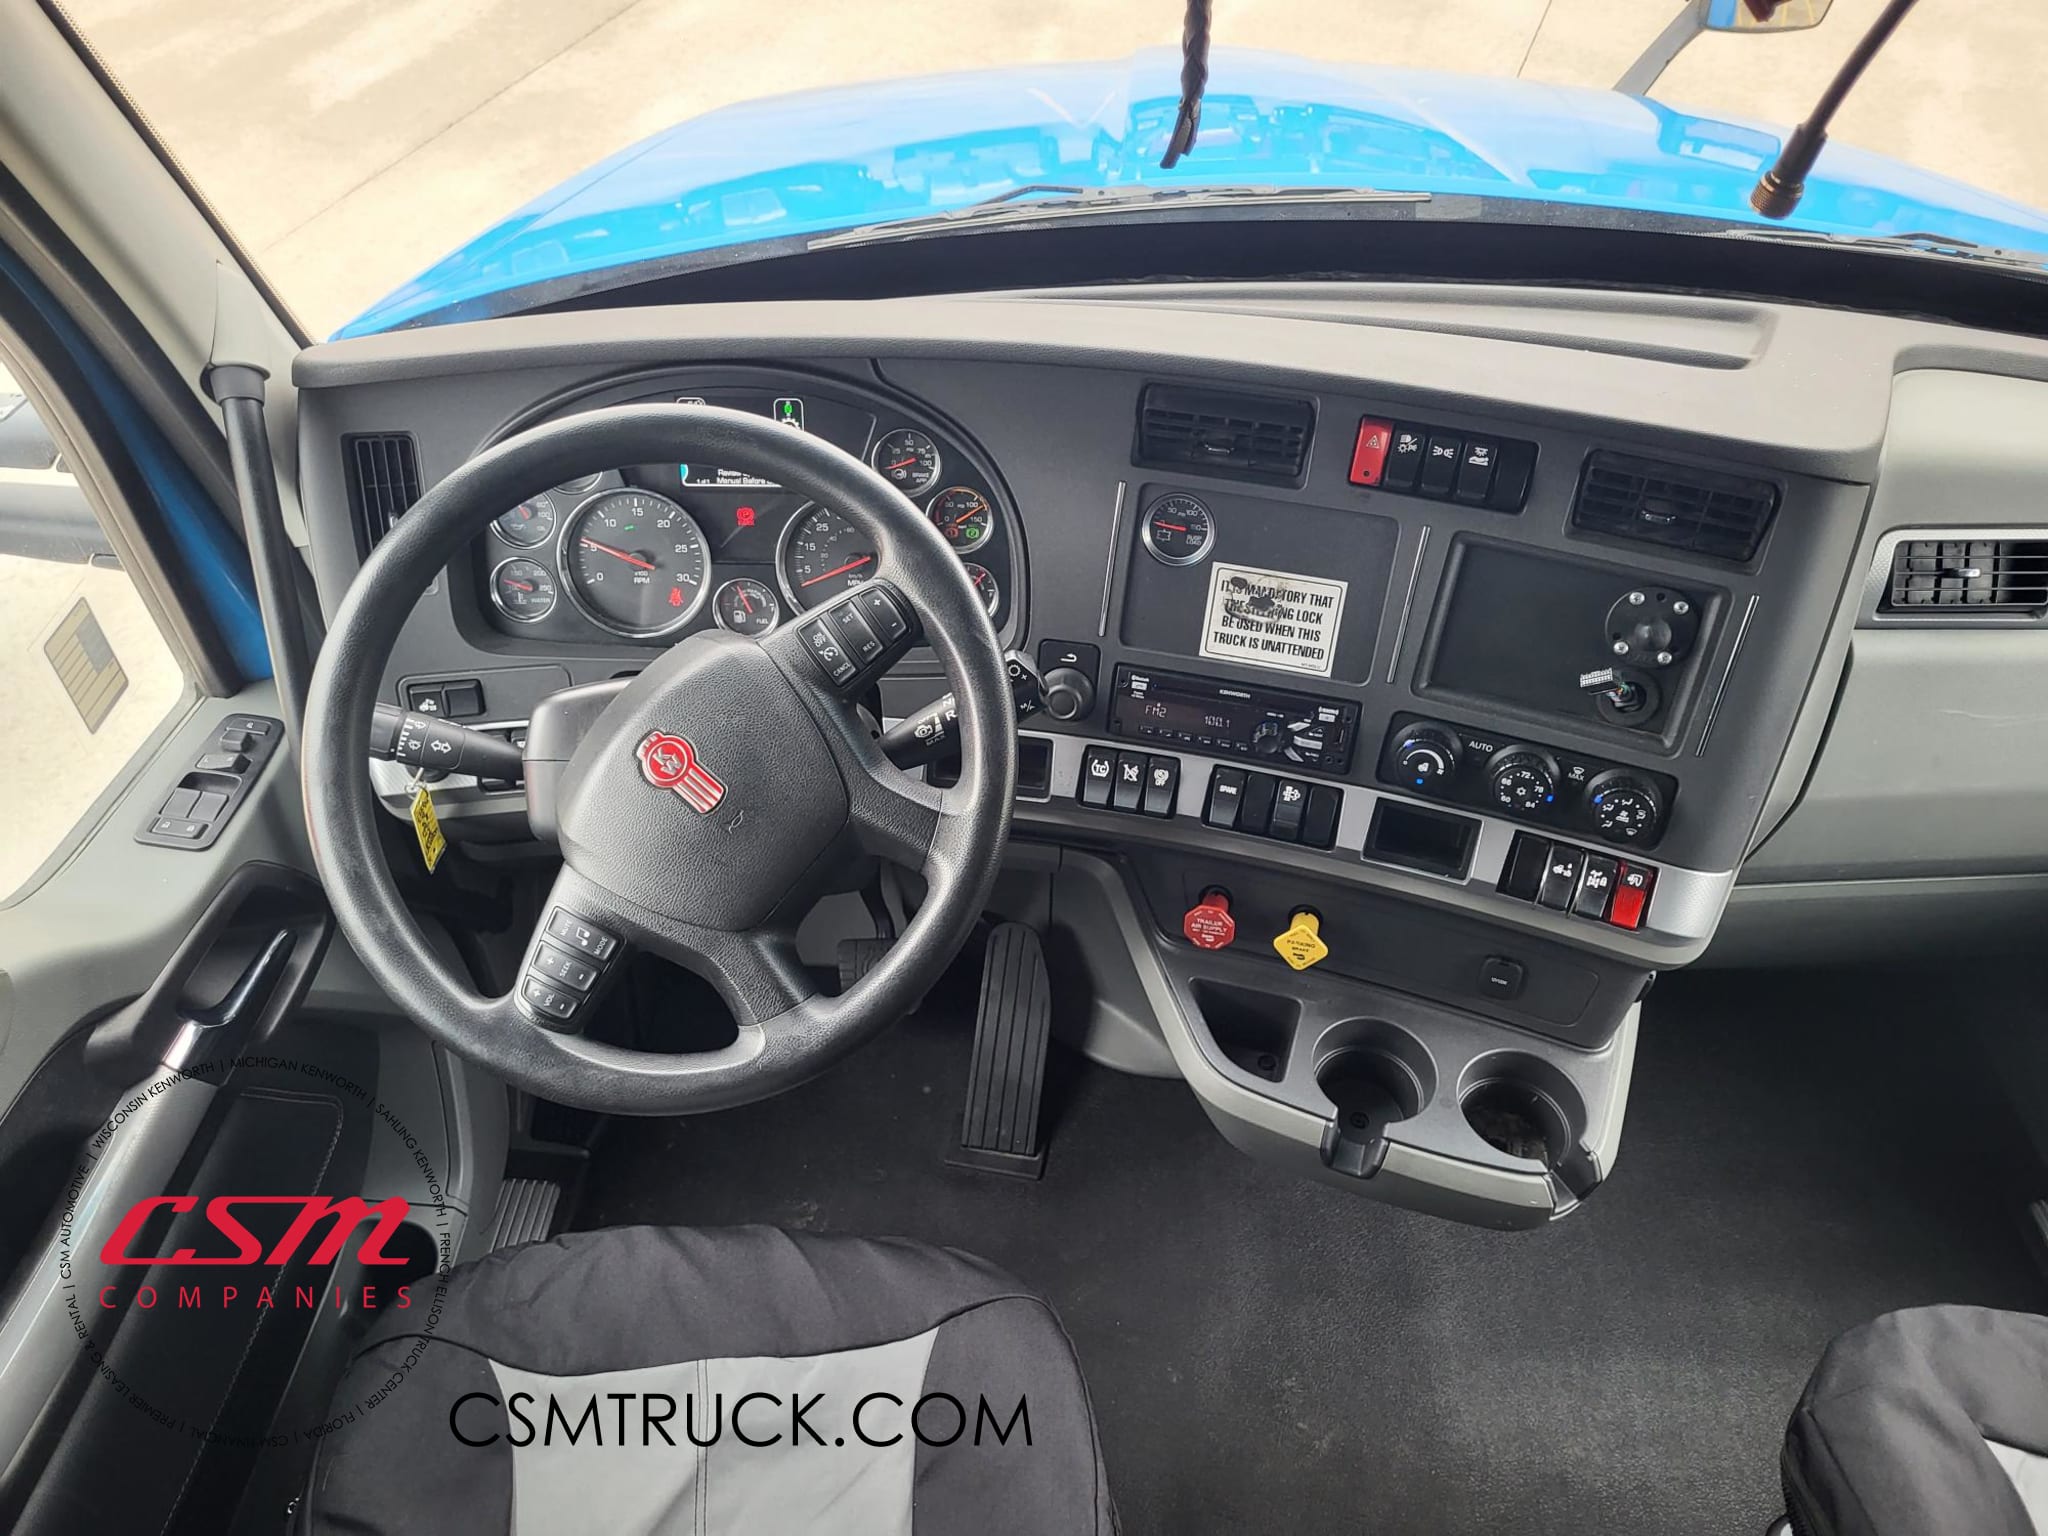 Interior dash for this 2020 Kenworth T680 (Stock number: ULJ354427)